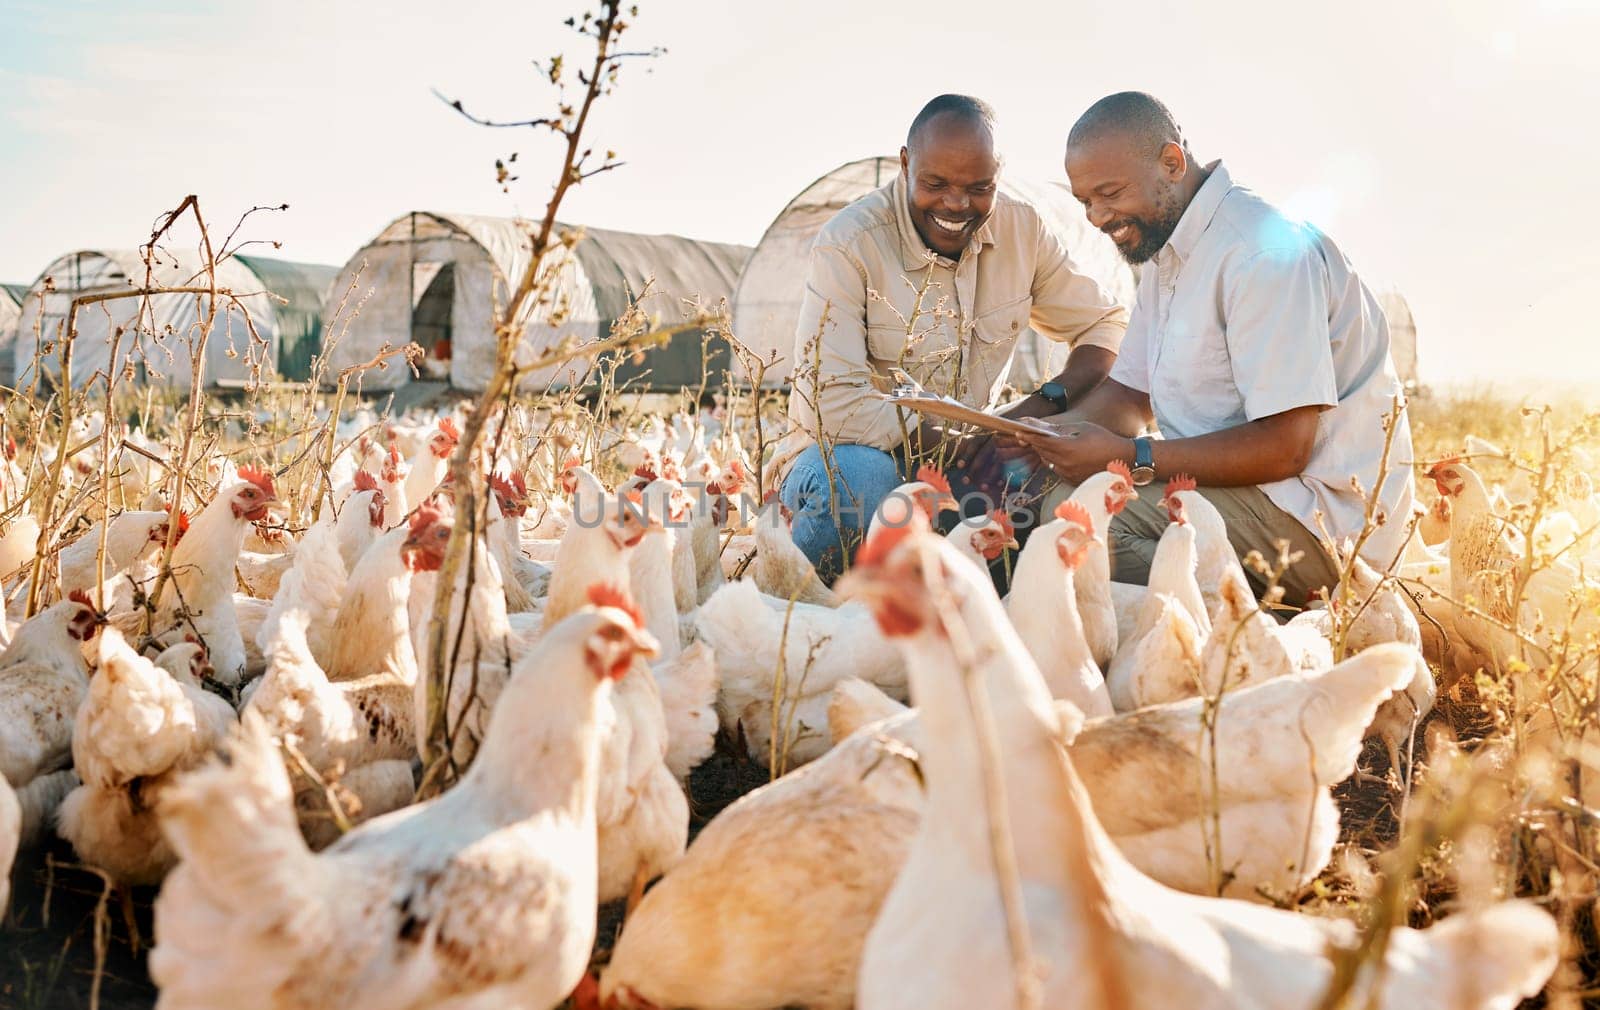 People, agriculture checklist and chicken in sustainability farming, eco friendly or free range industry management. Happy african men with animals health, clipboard and veterinary inspection outdoor.